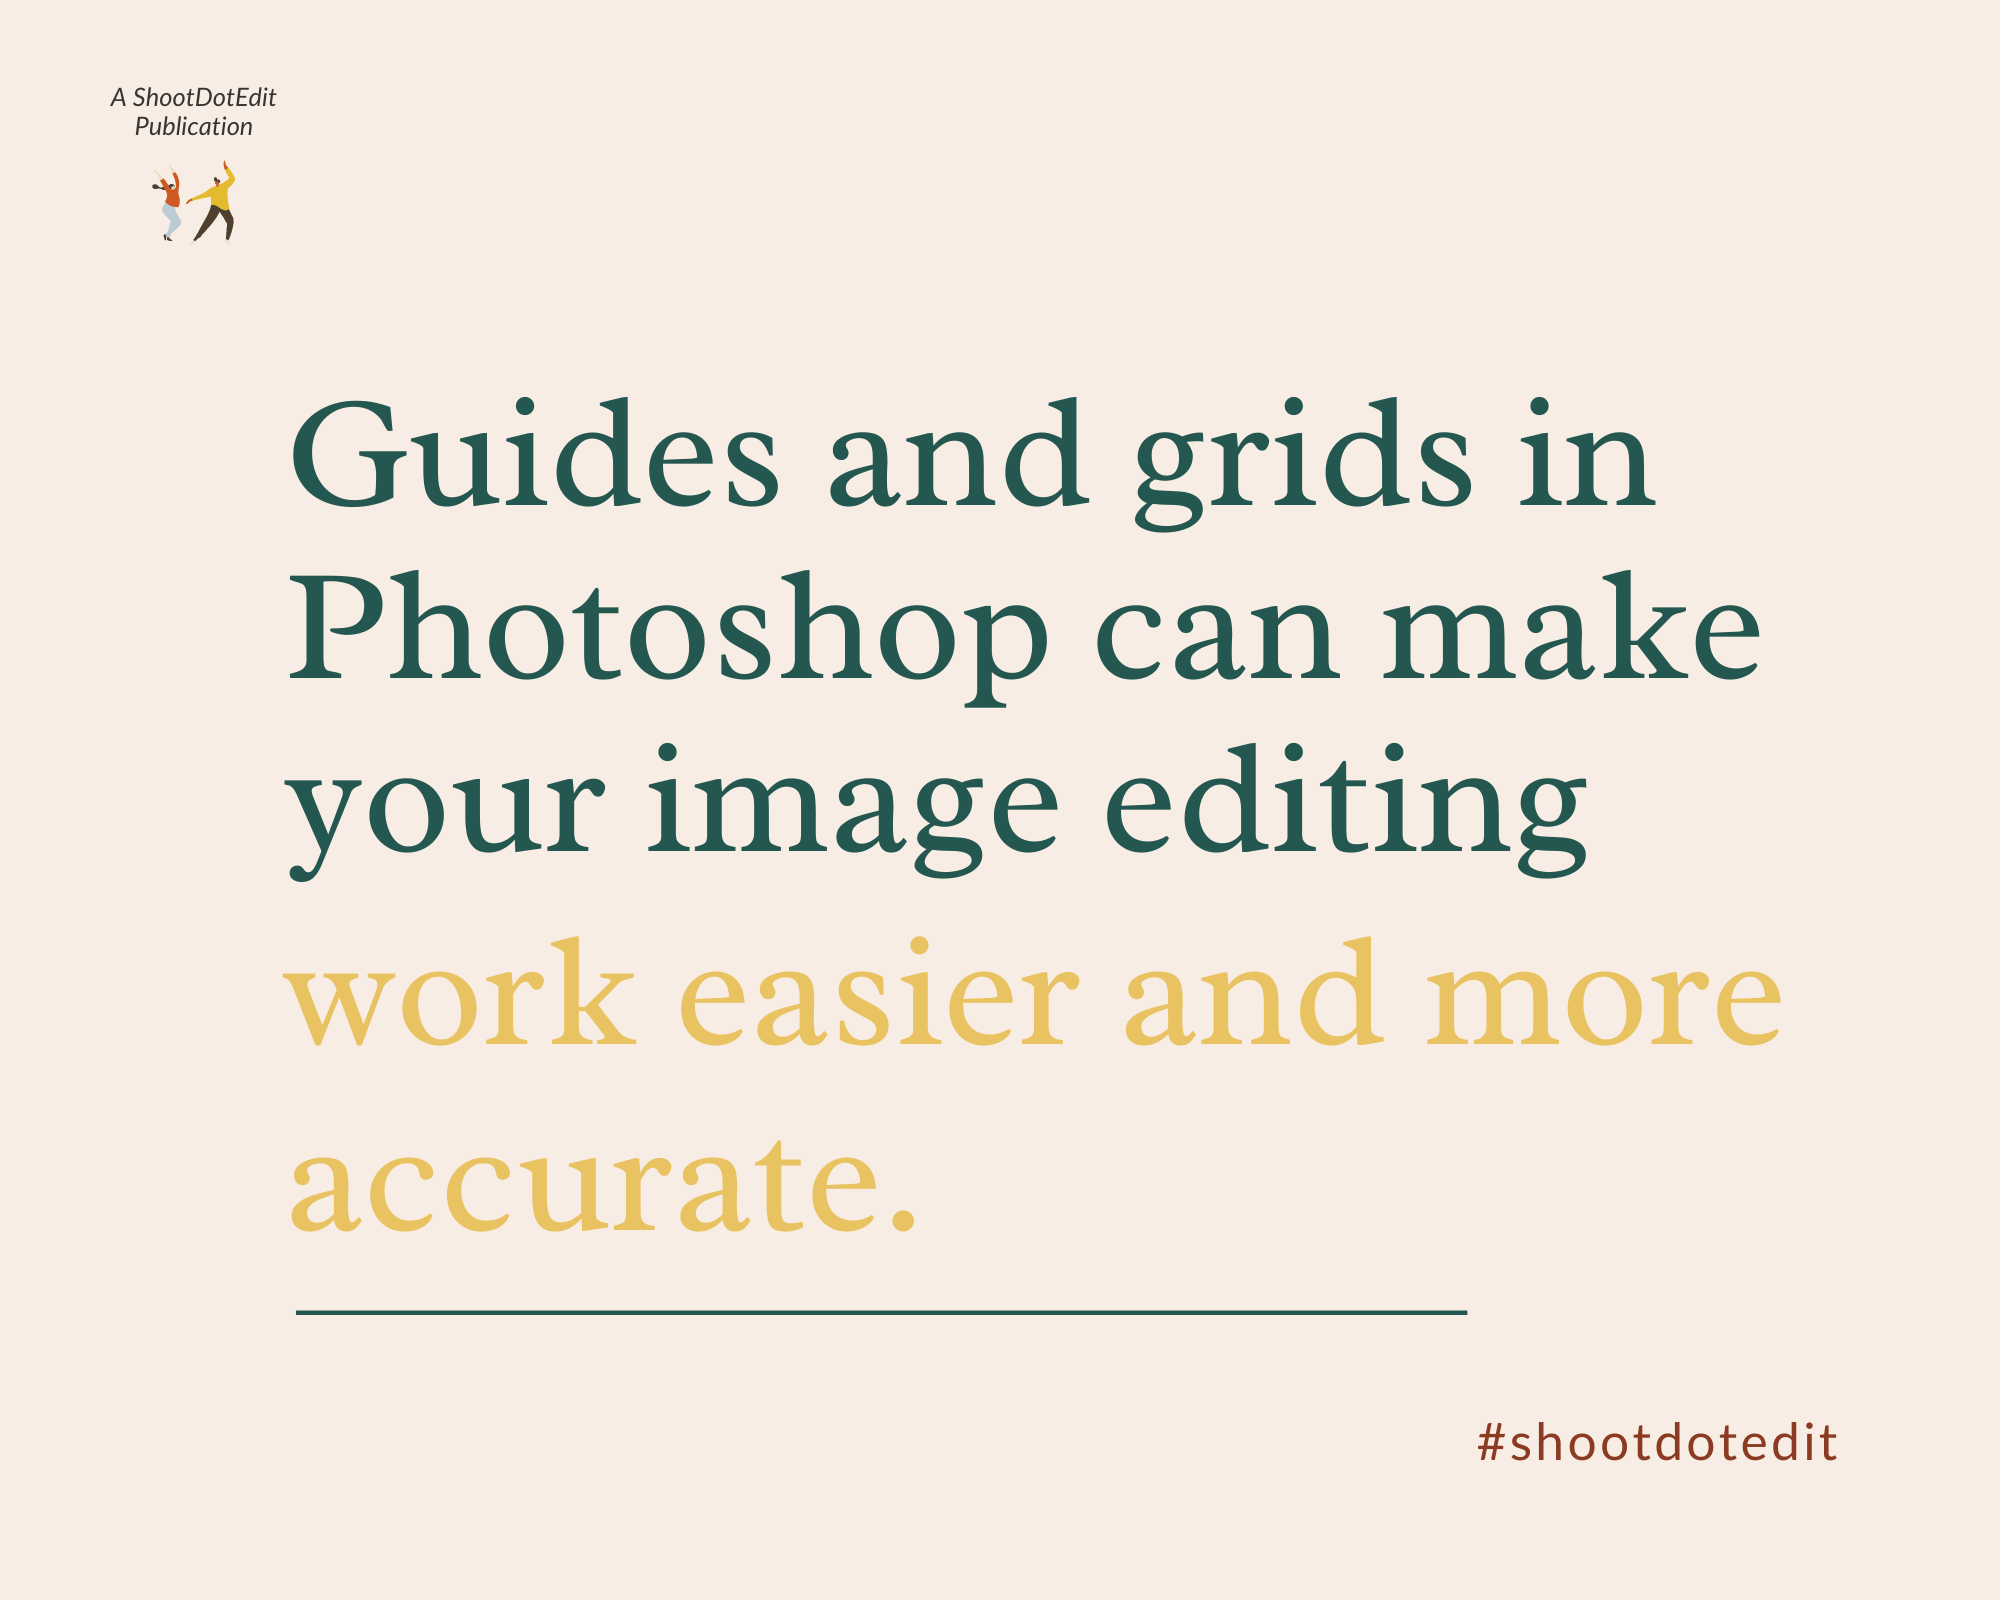 Infographic stating guides and grids in Photoshop can make your image editing work easier and more accurate